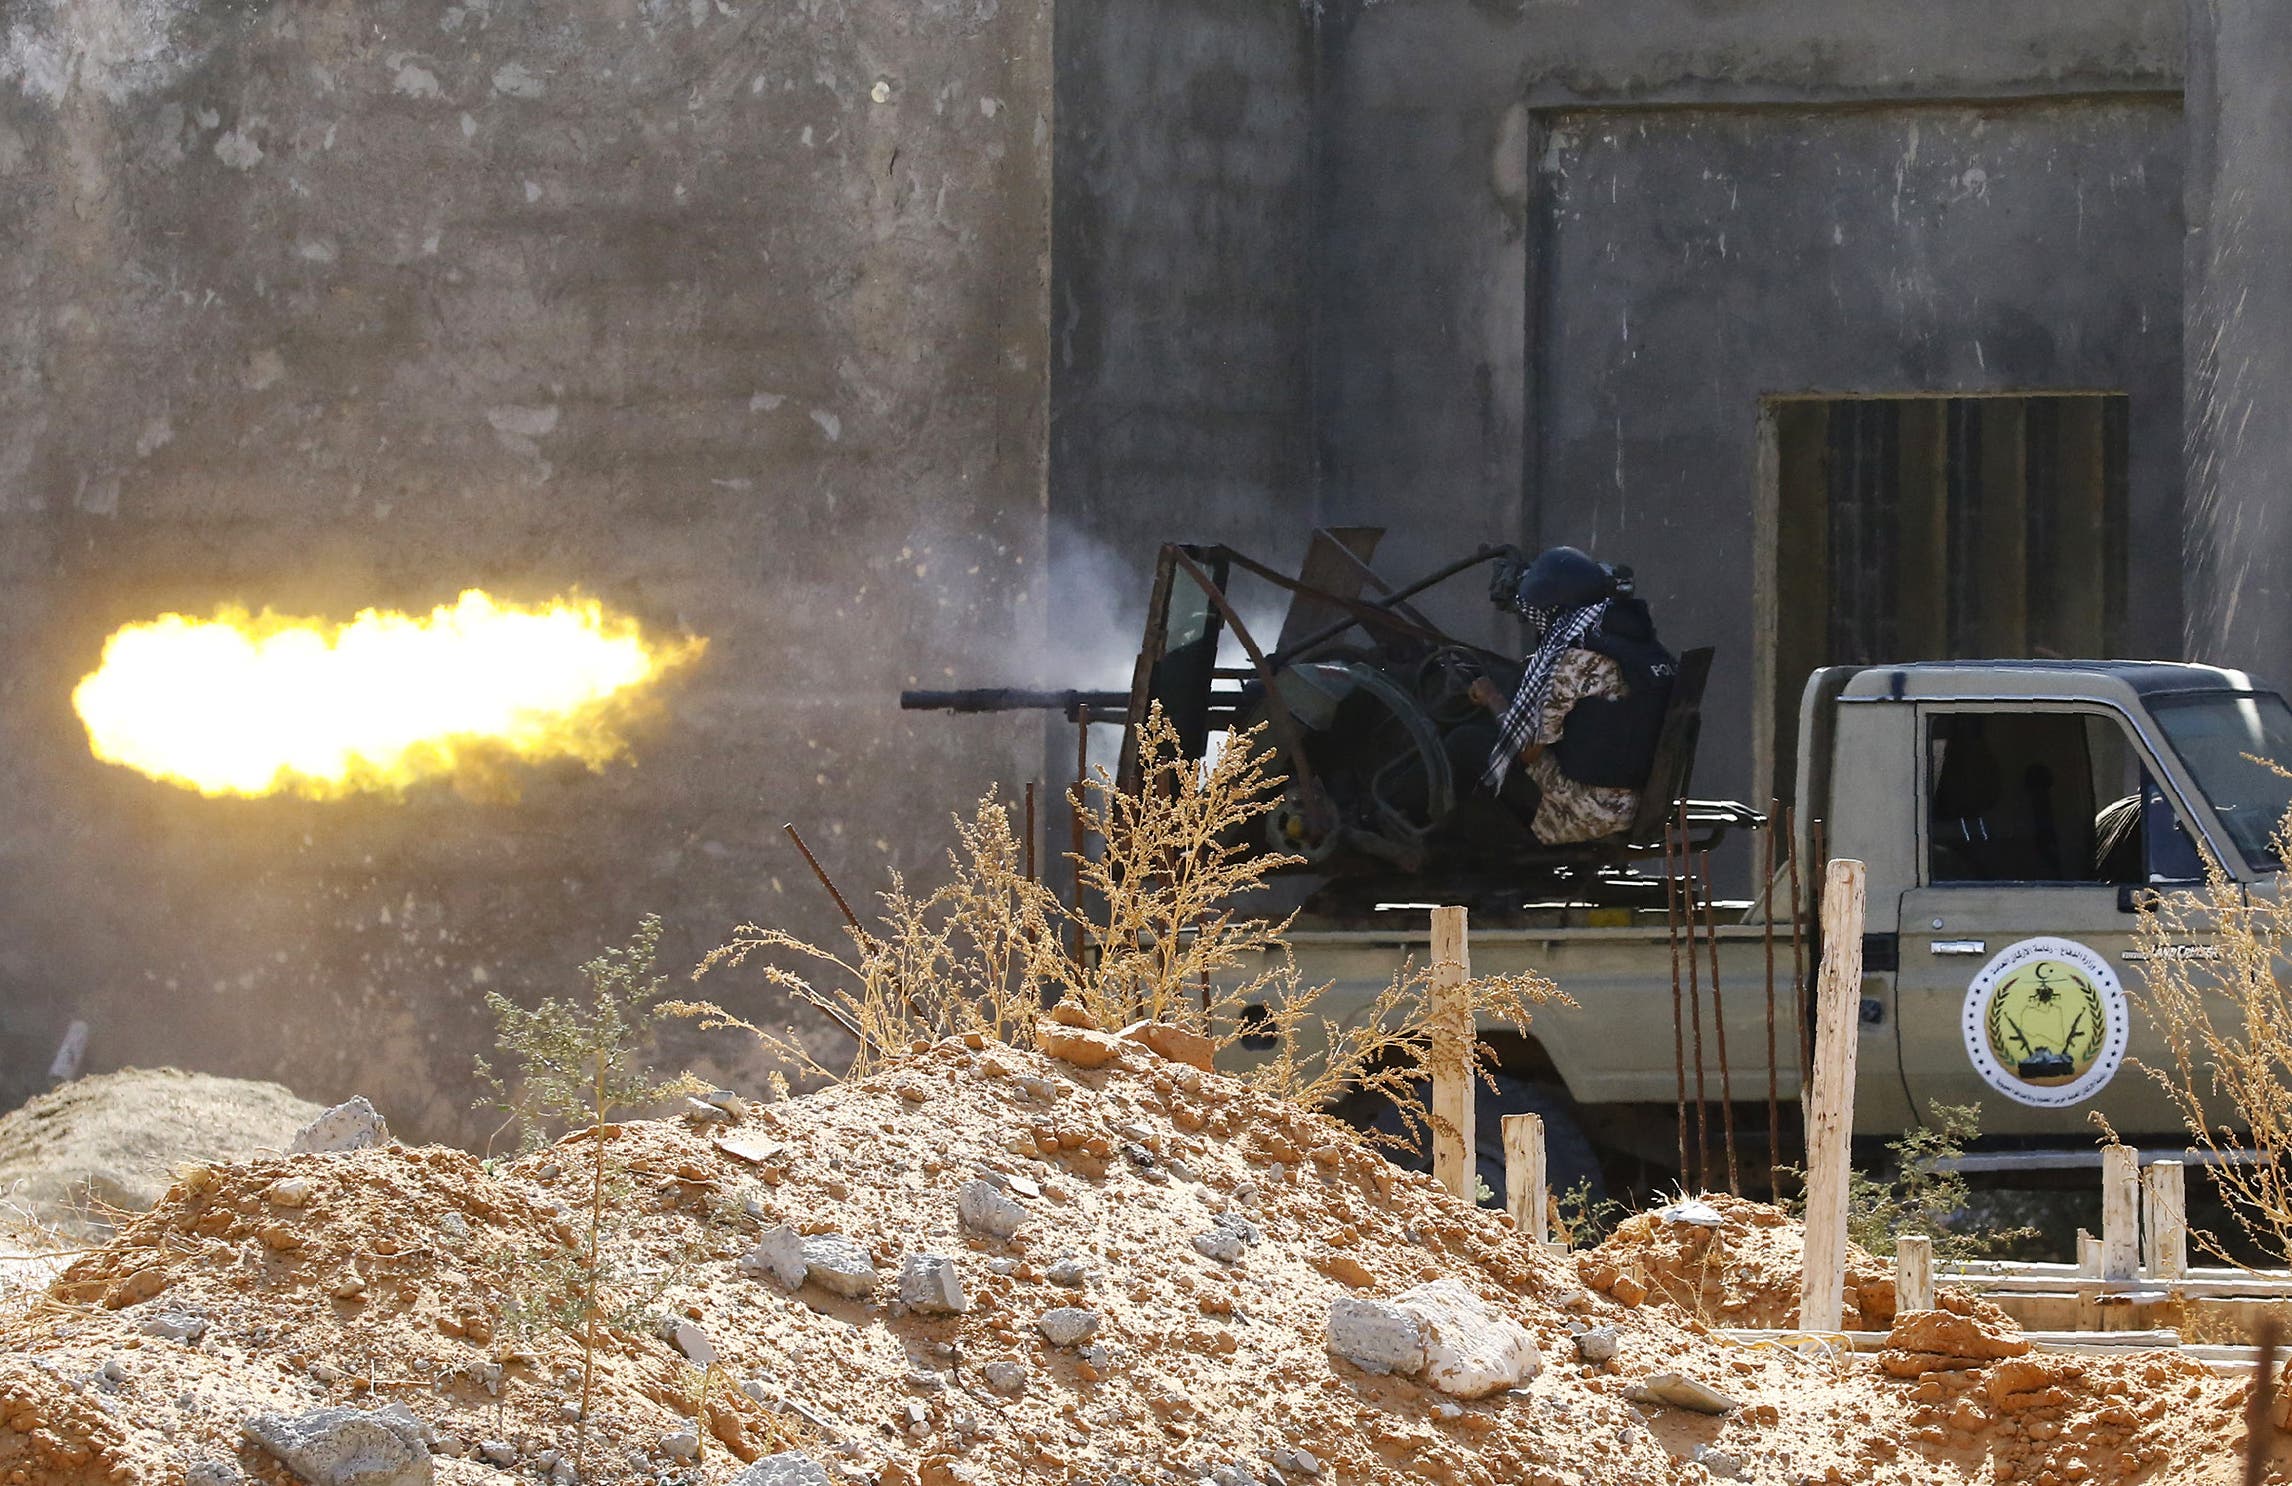 A fighter loyal to the Libyan Government of National Accord (GNA) fires a truck-mounted gun during clashes in Tripoli's suburb of Ain Zara, on September 7, 2019. (AP)